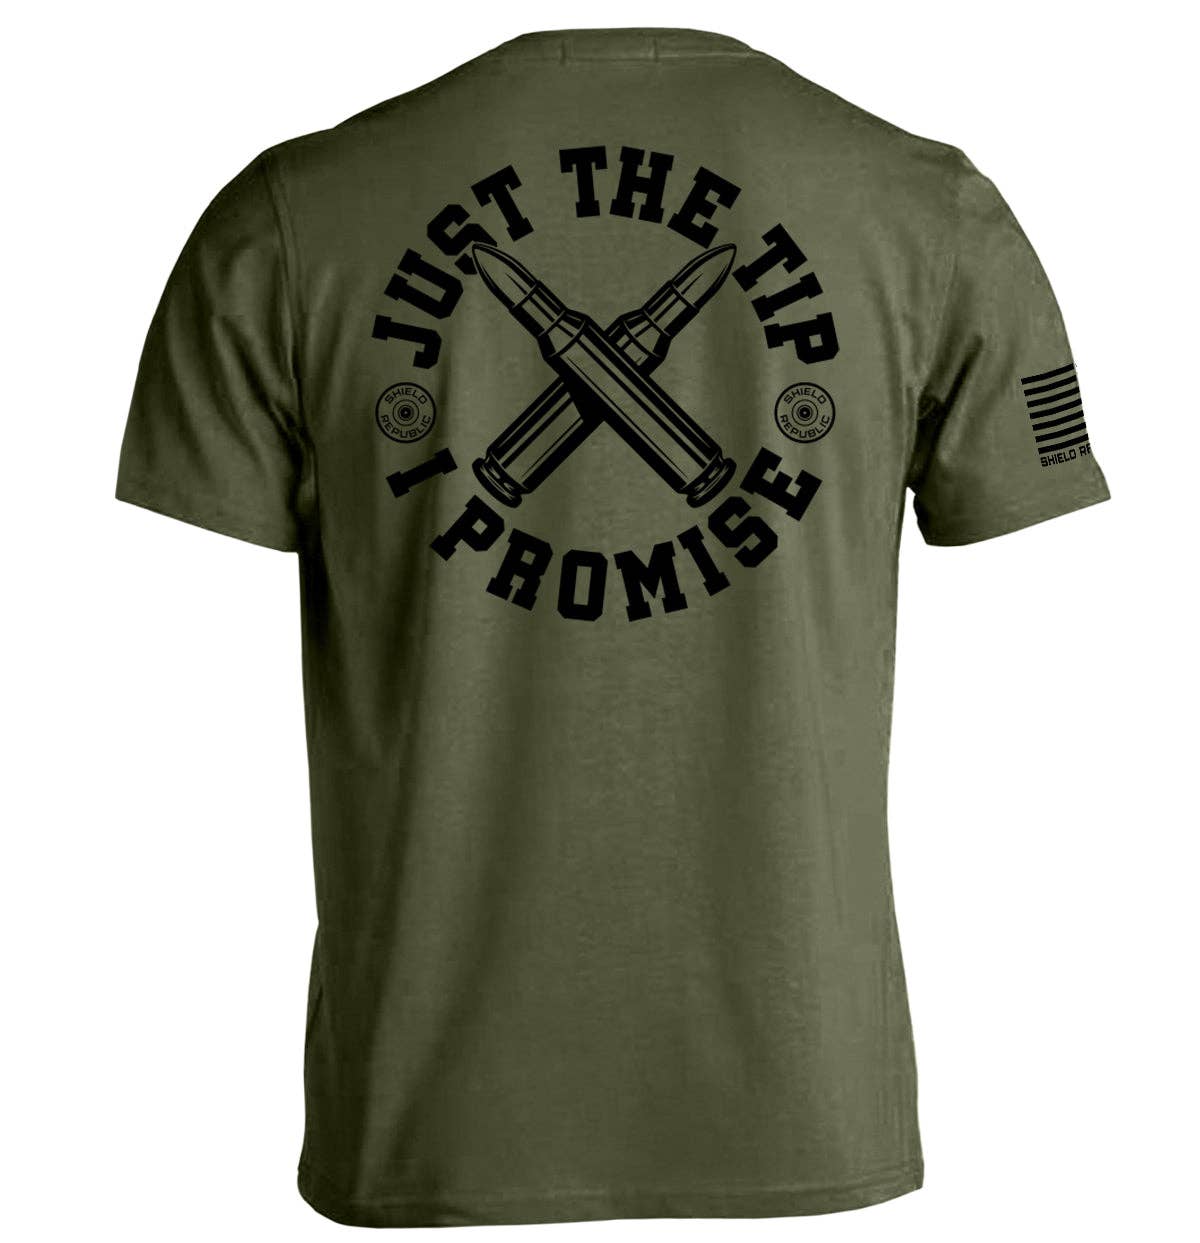 Just the Tip I Promise Tee